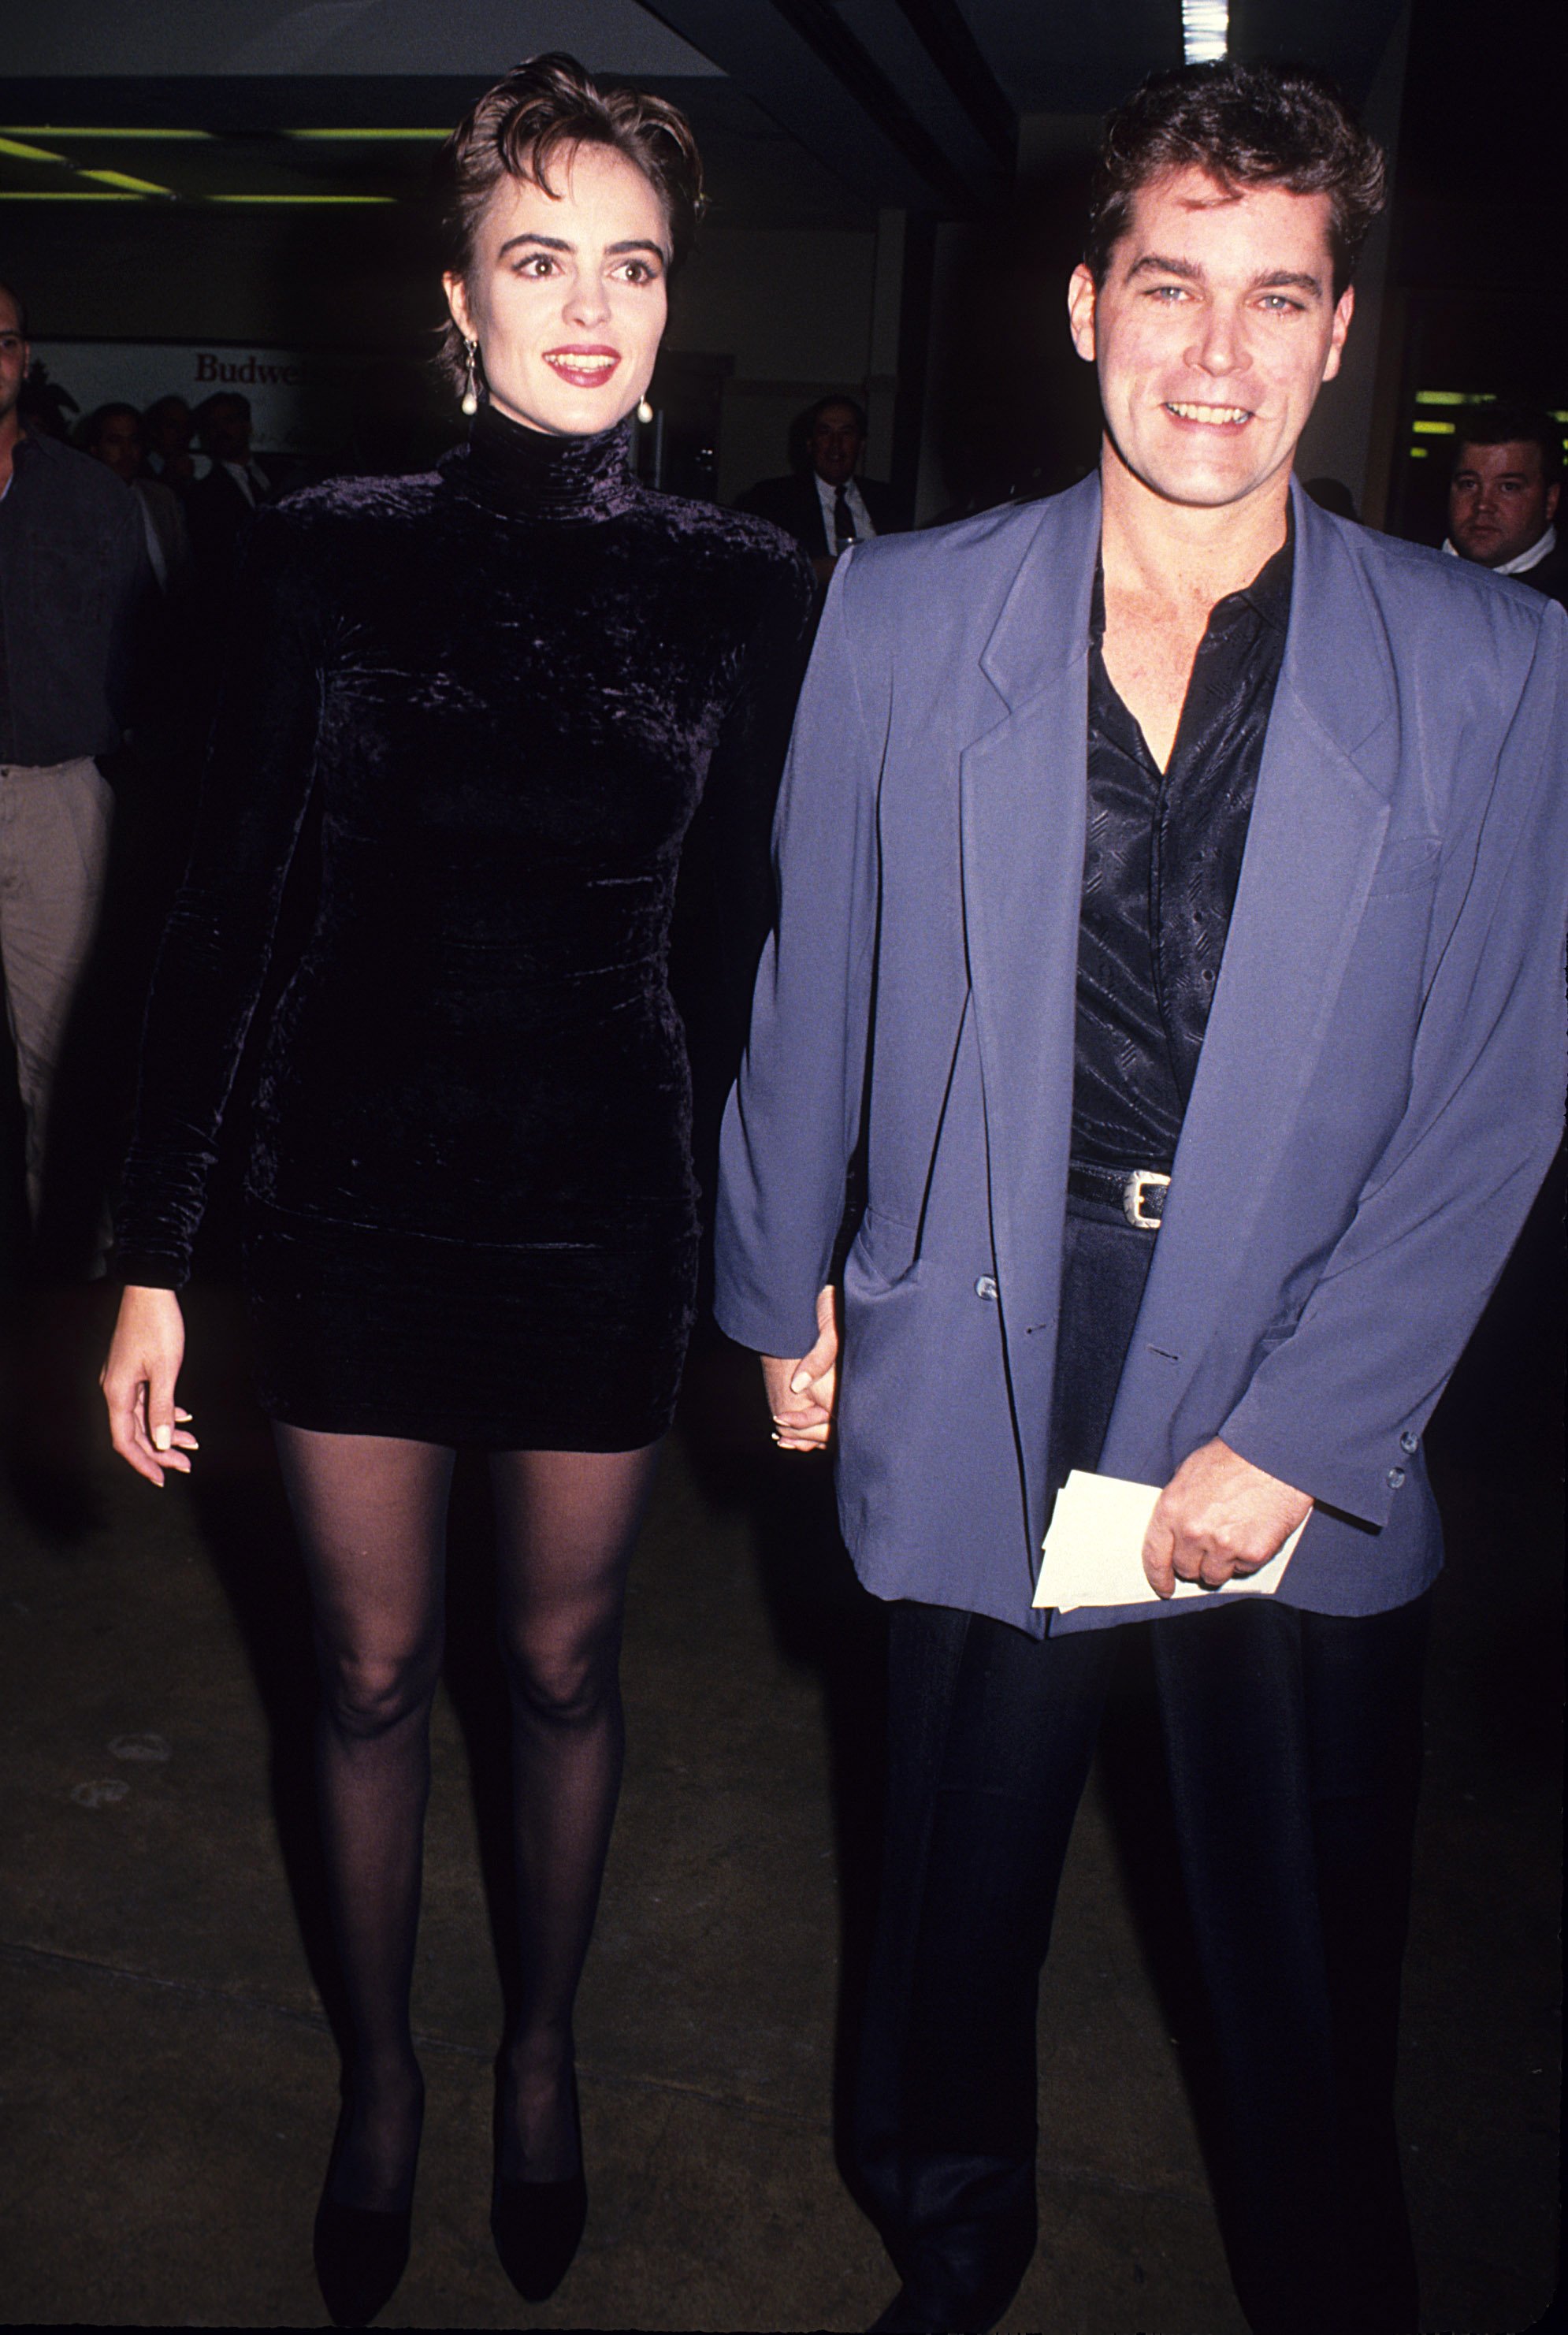 Michelle Johnson and Ray Liotta at Championship Fight on April 19, 1991, in Atlantic City, New Jersey. | Source: Tom Wargacki/WireImage/Getty Images